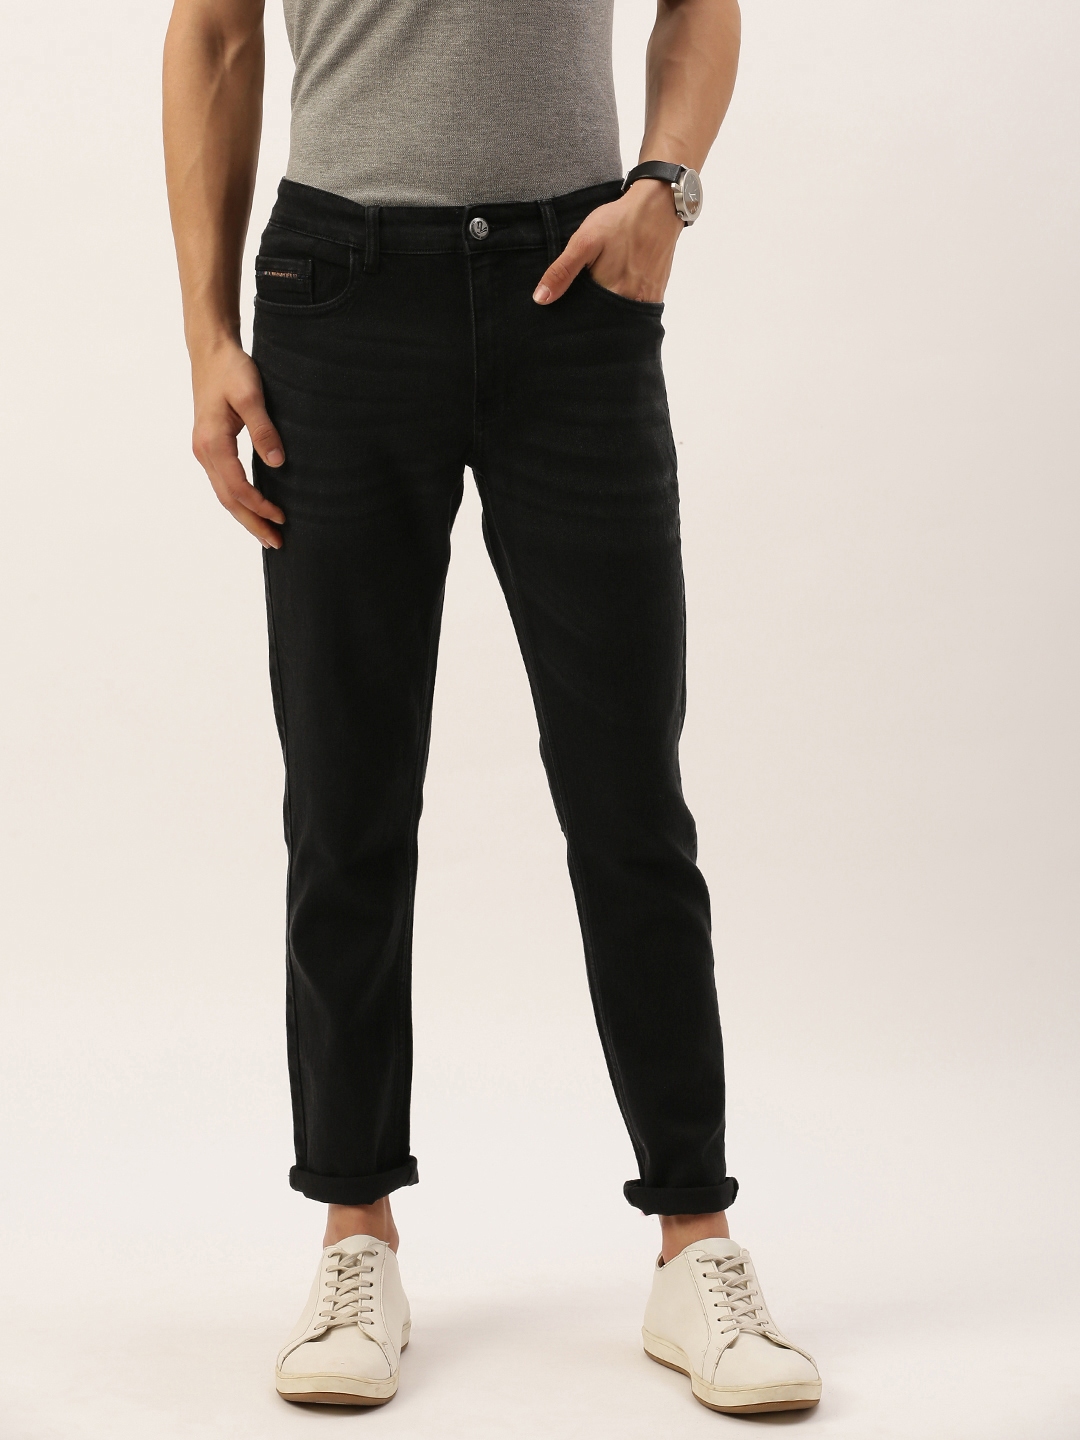 Slim Fit Casual Wear Mens Super Skinny Stretch Jeans at Rs 450